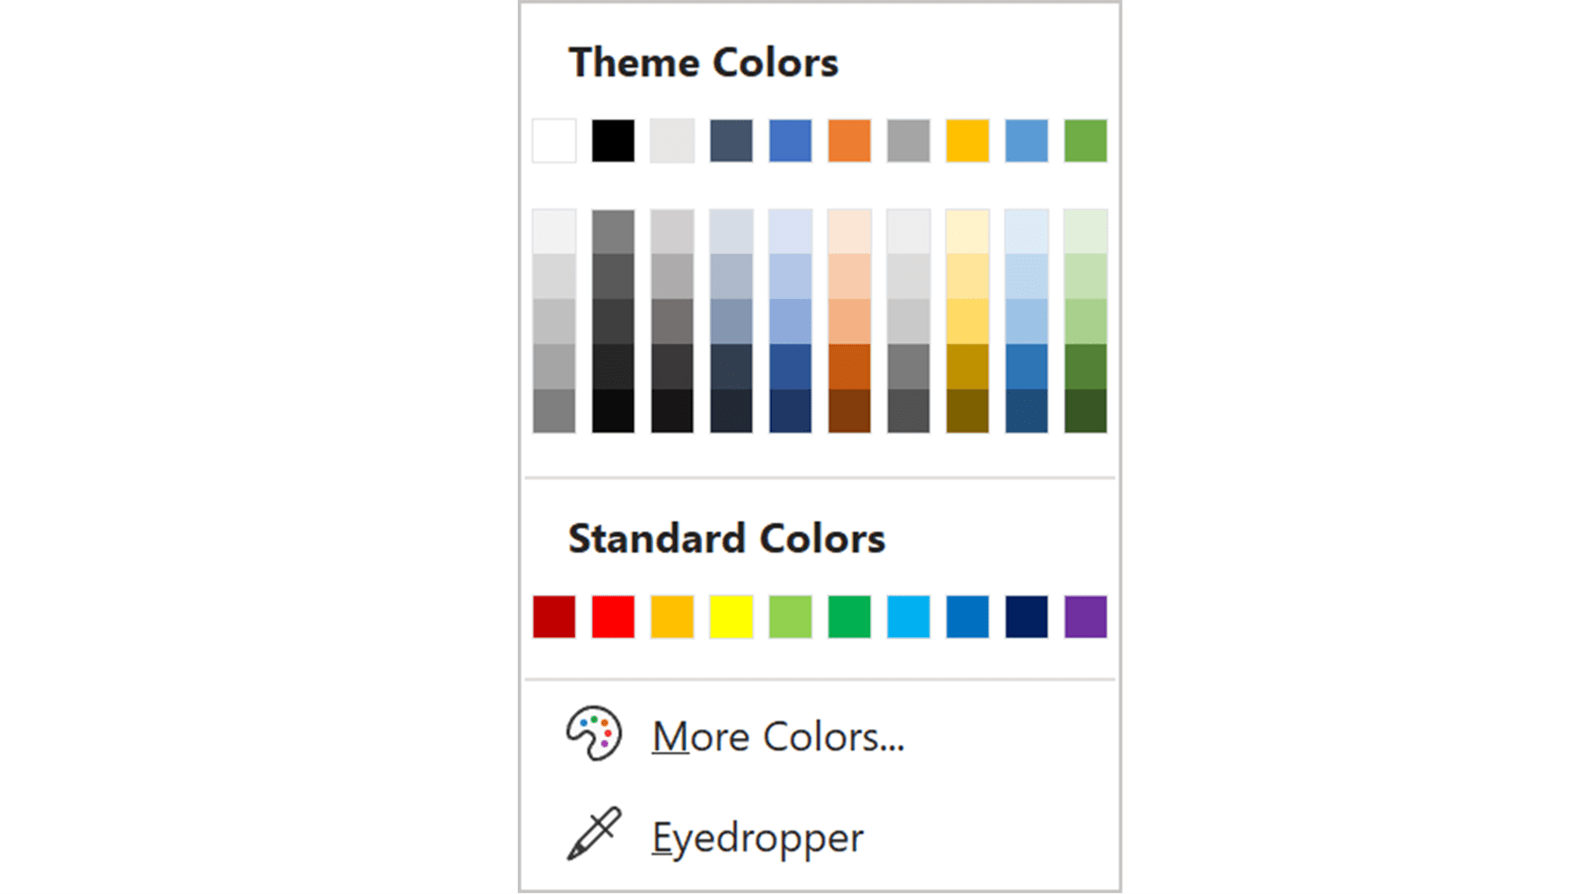 Screenshot of the Theme Colors panel in PowerPoint